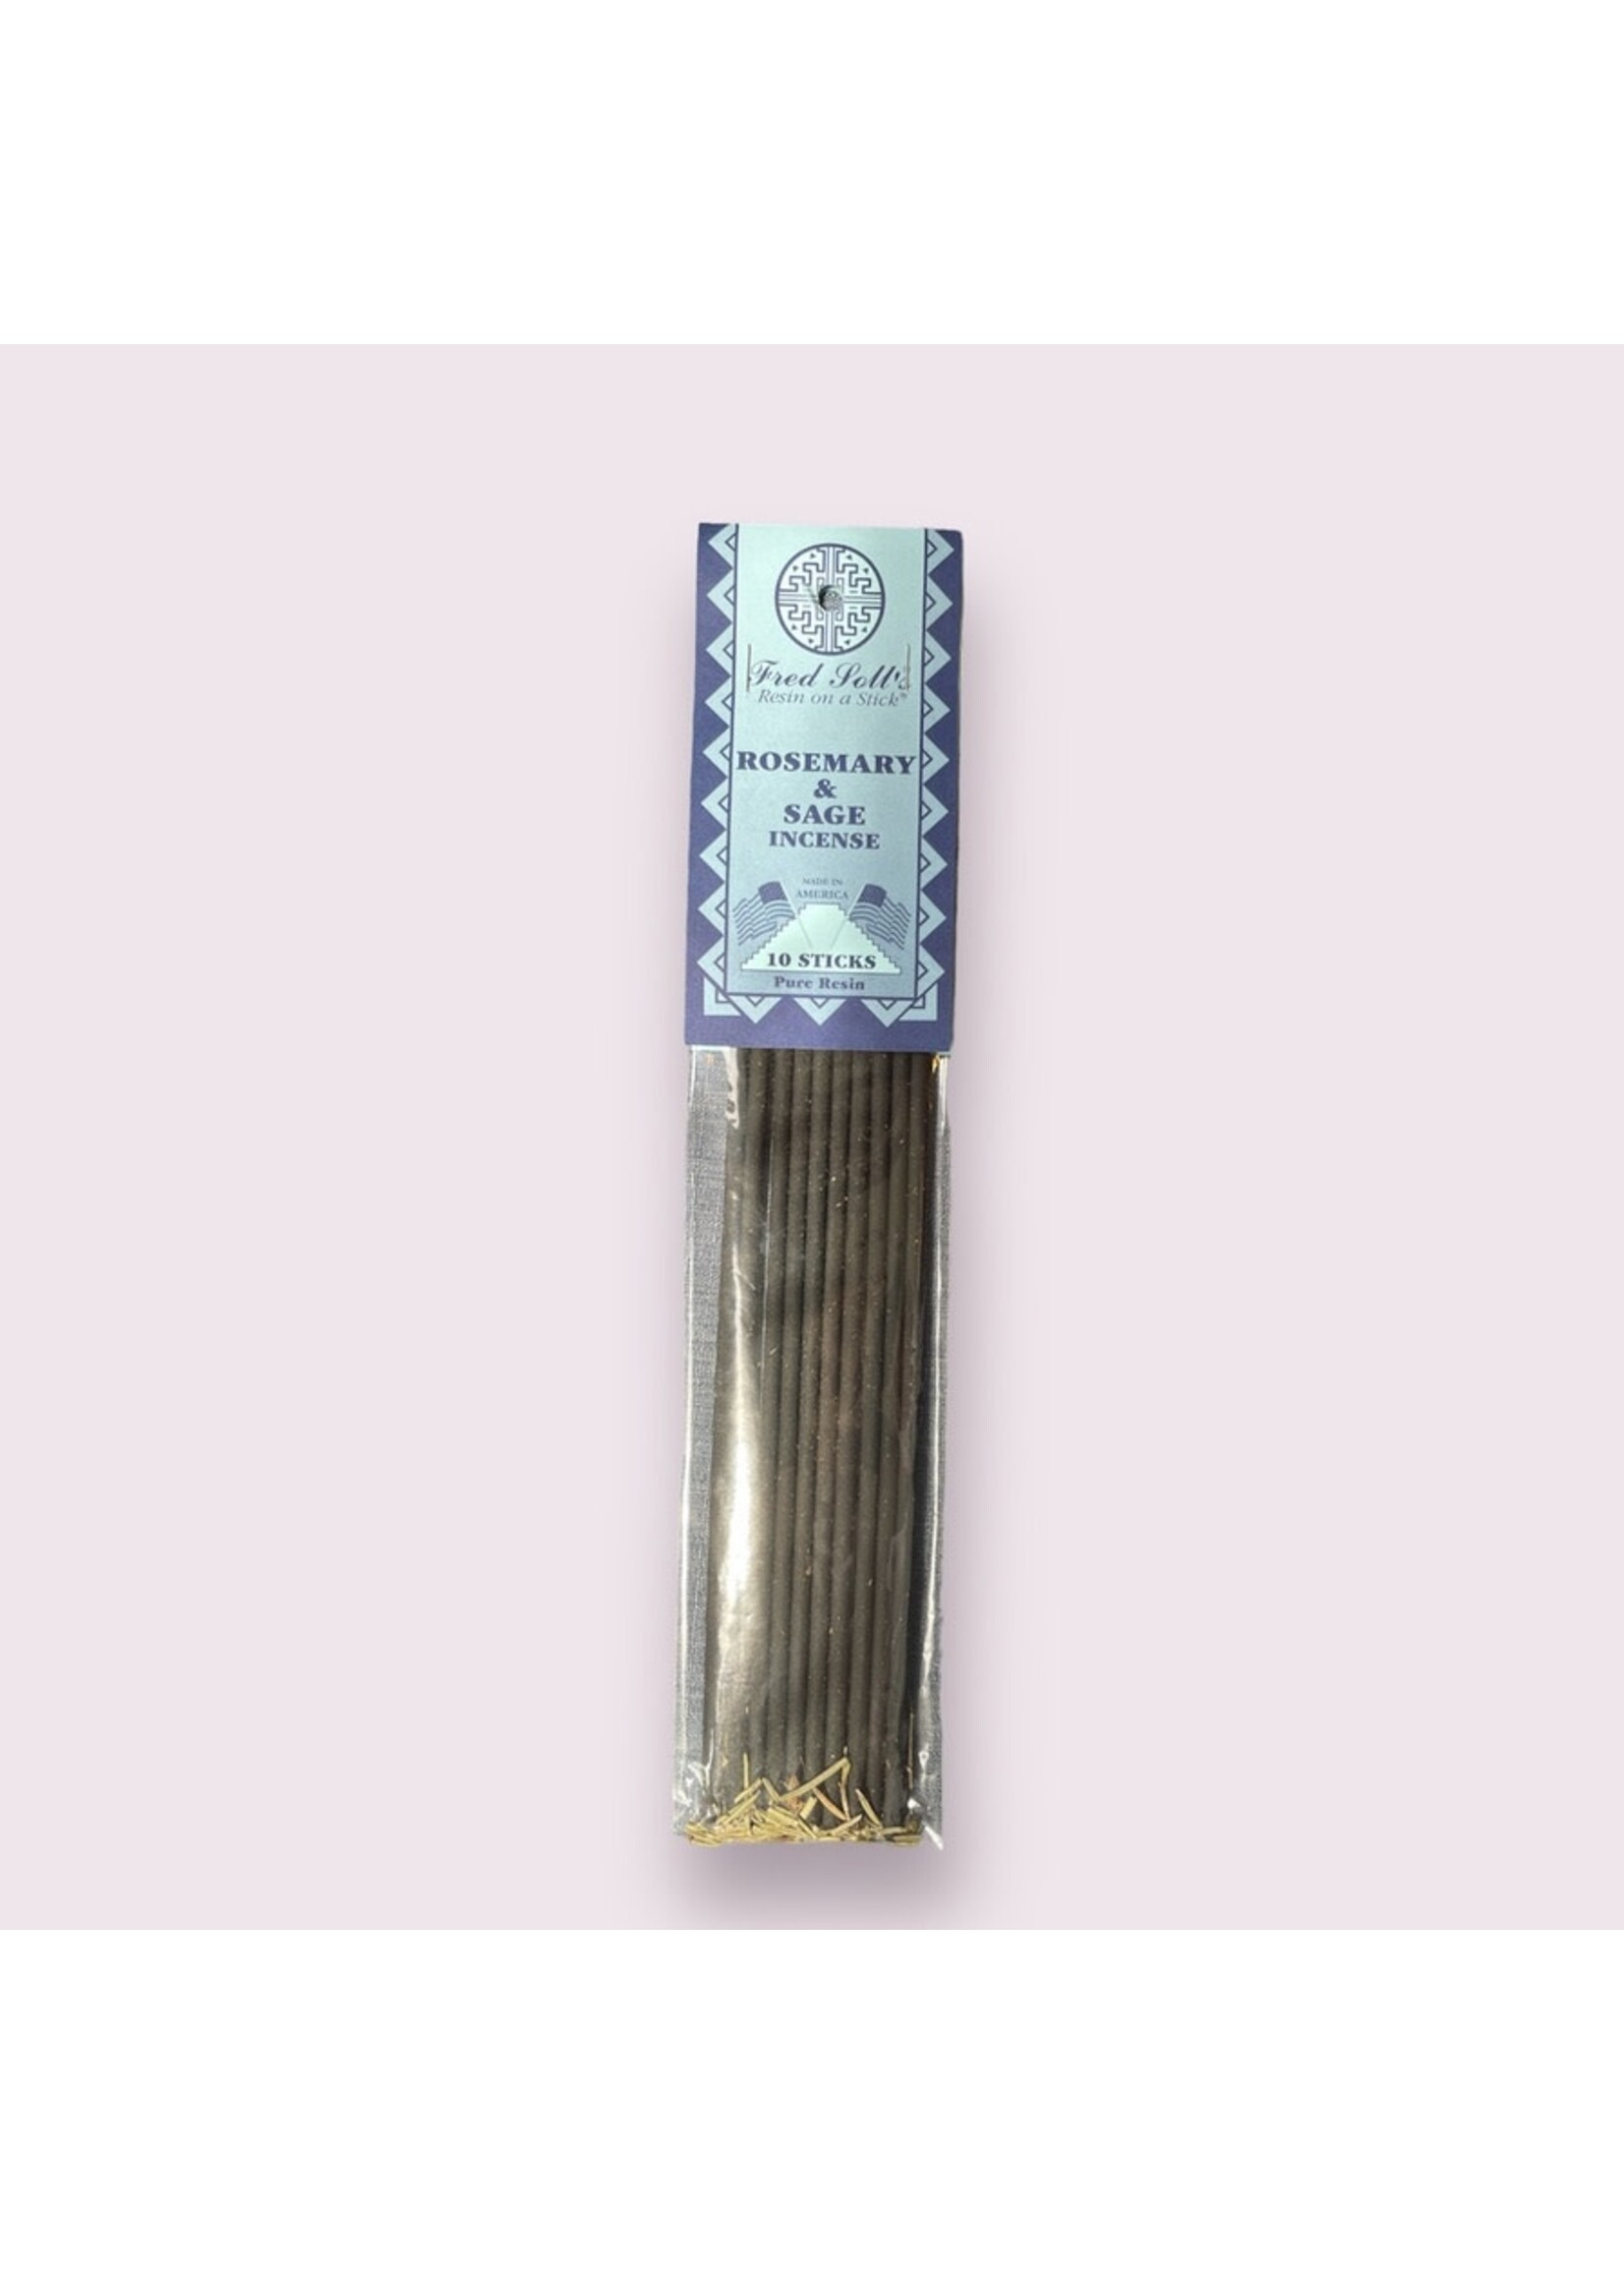 Rosemary & Sage | Resin Stick Incense| Fred Soll